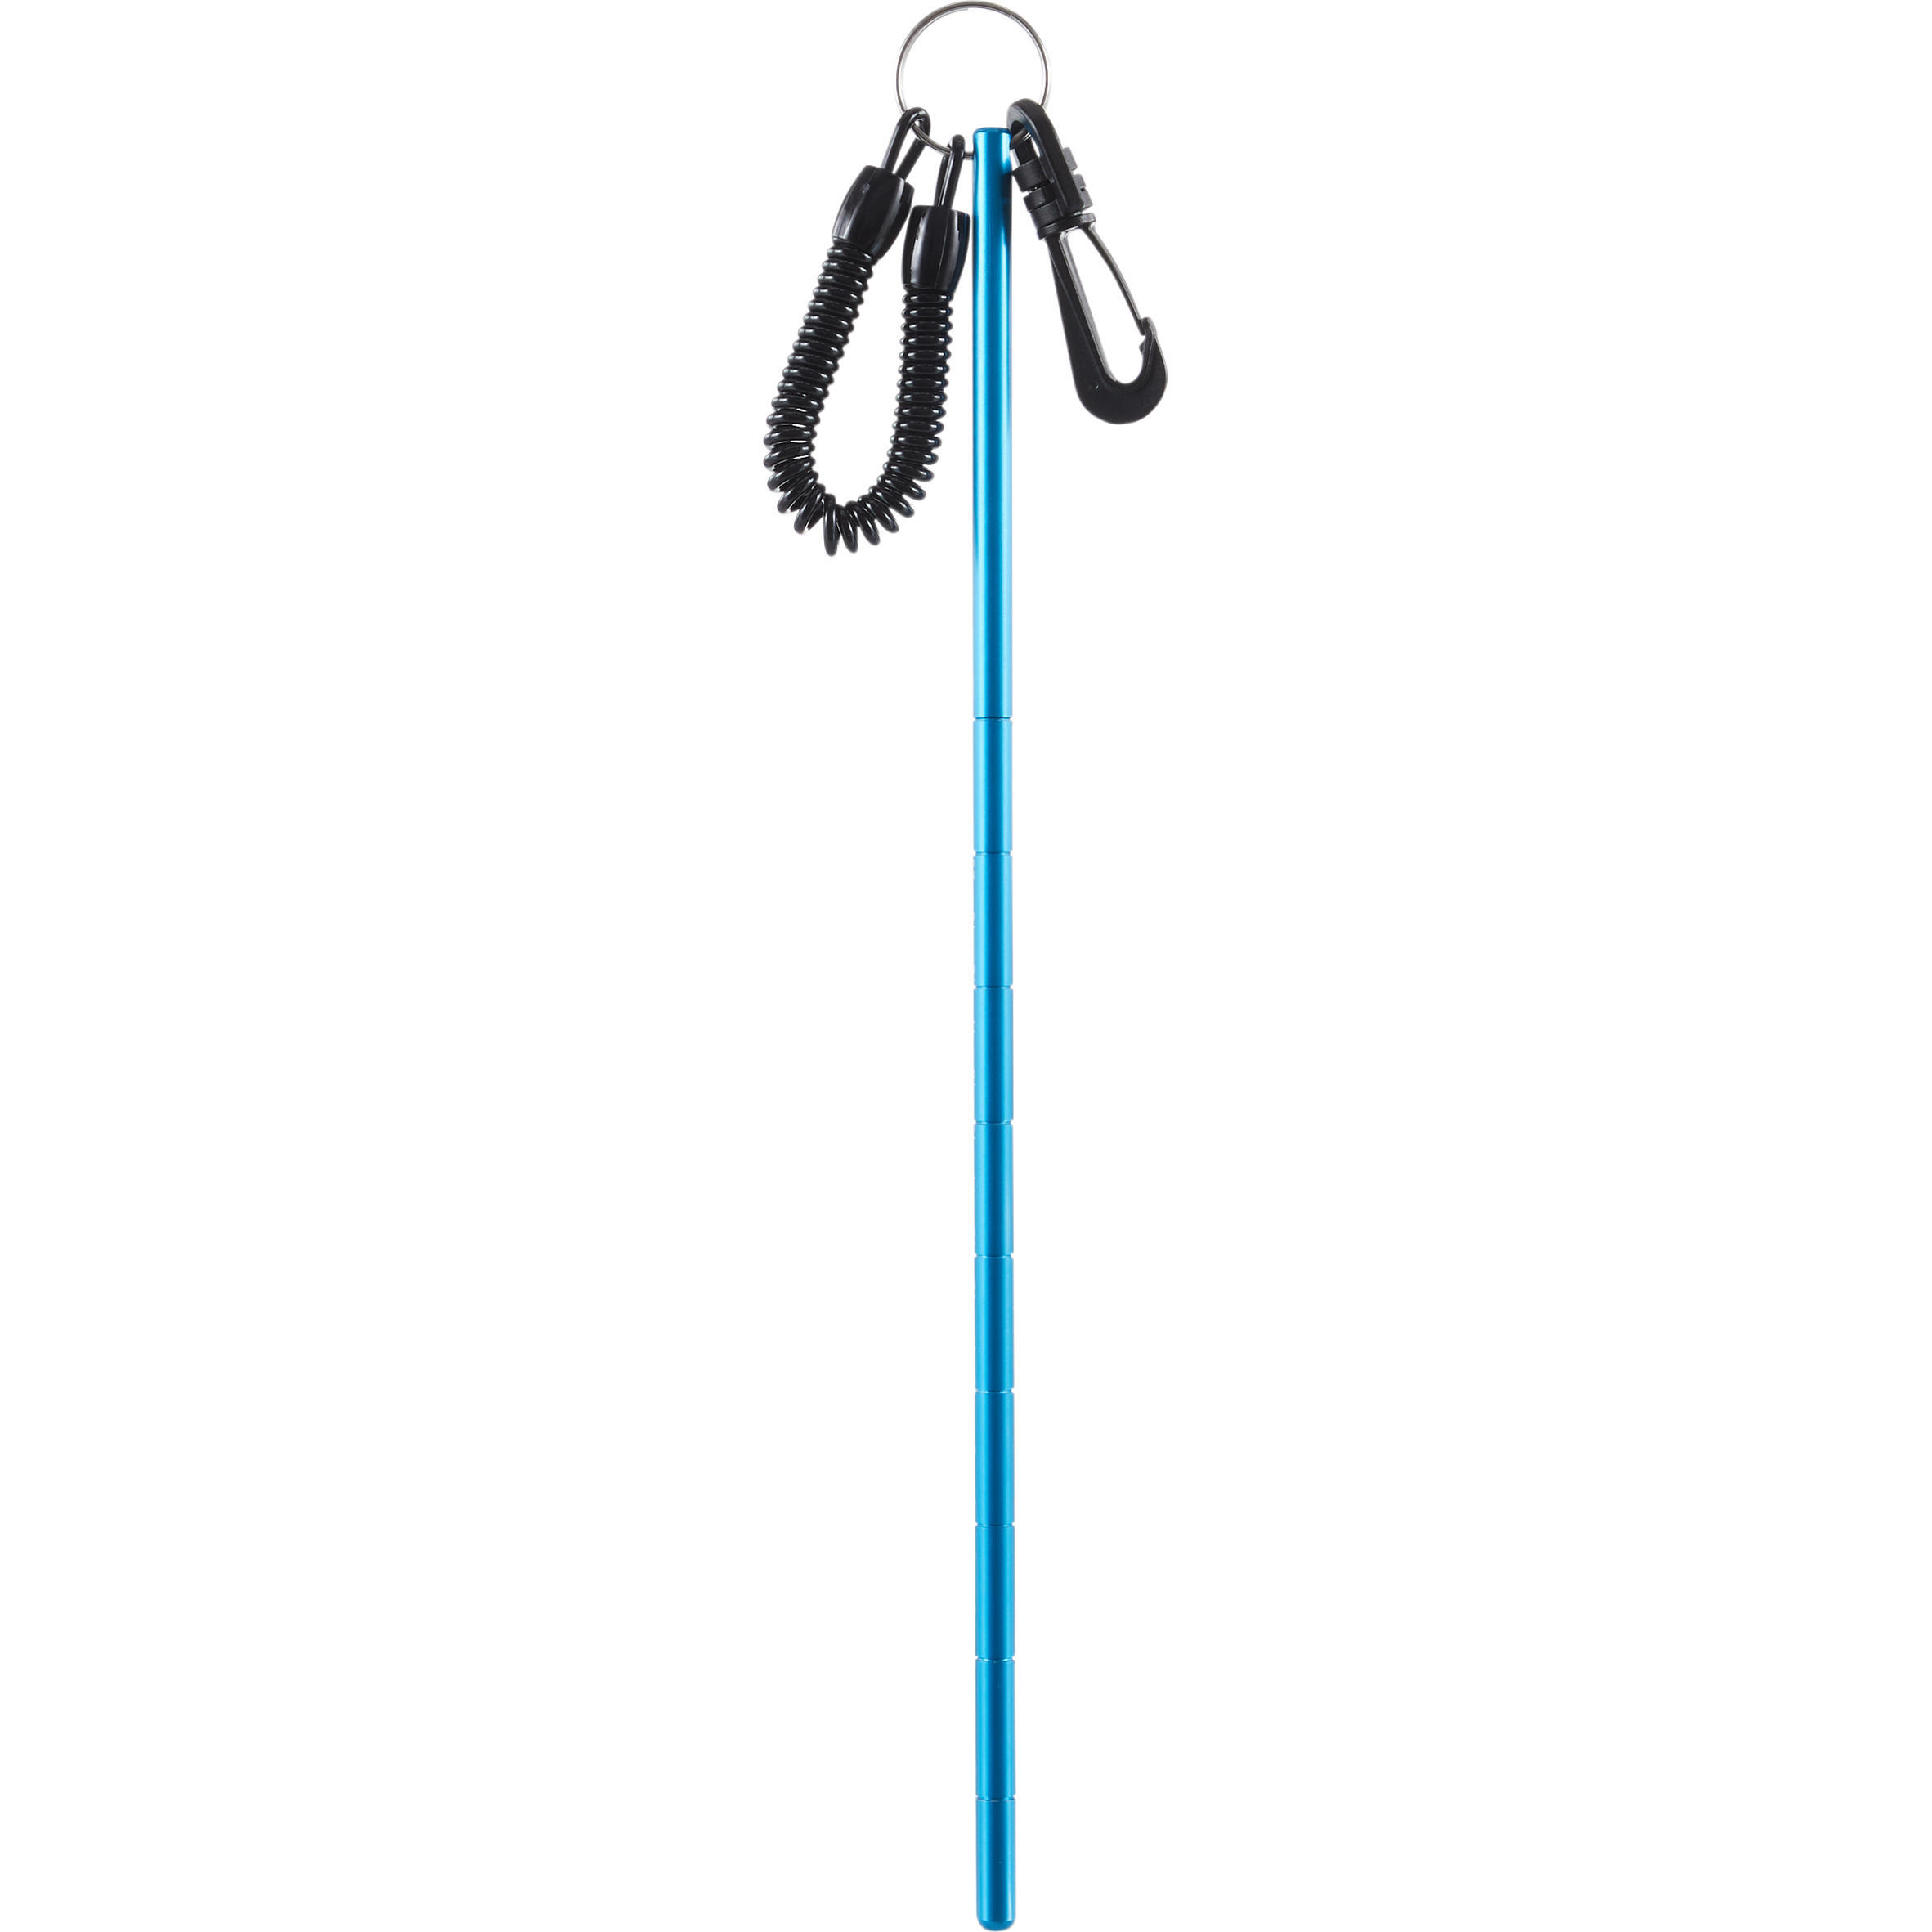 SUBEA Stainless steel scuba diving pointer, leash and carabiner